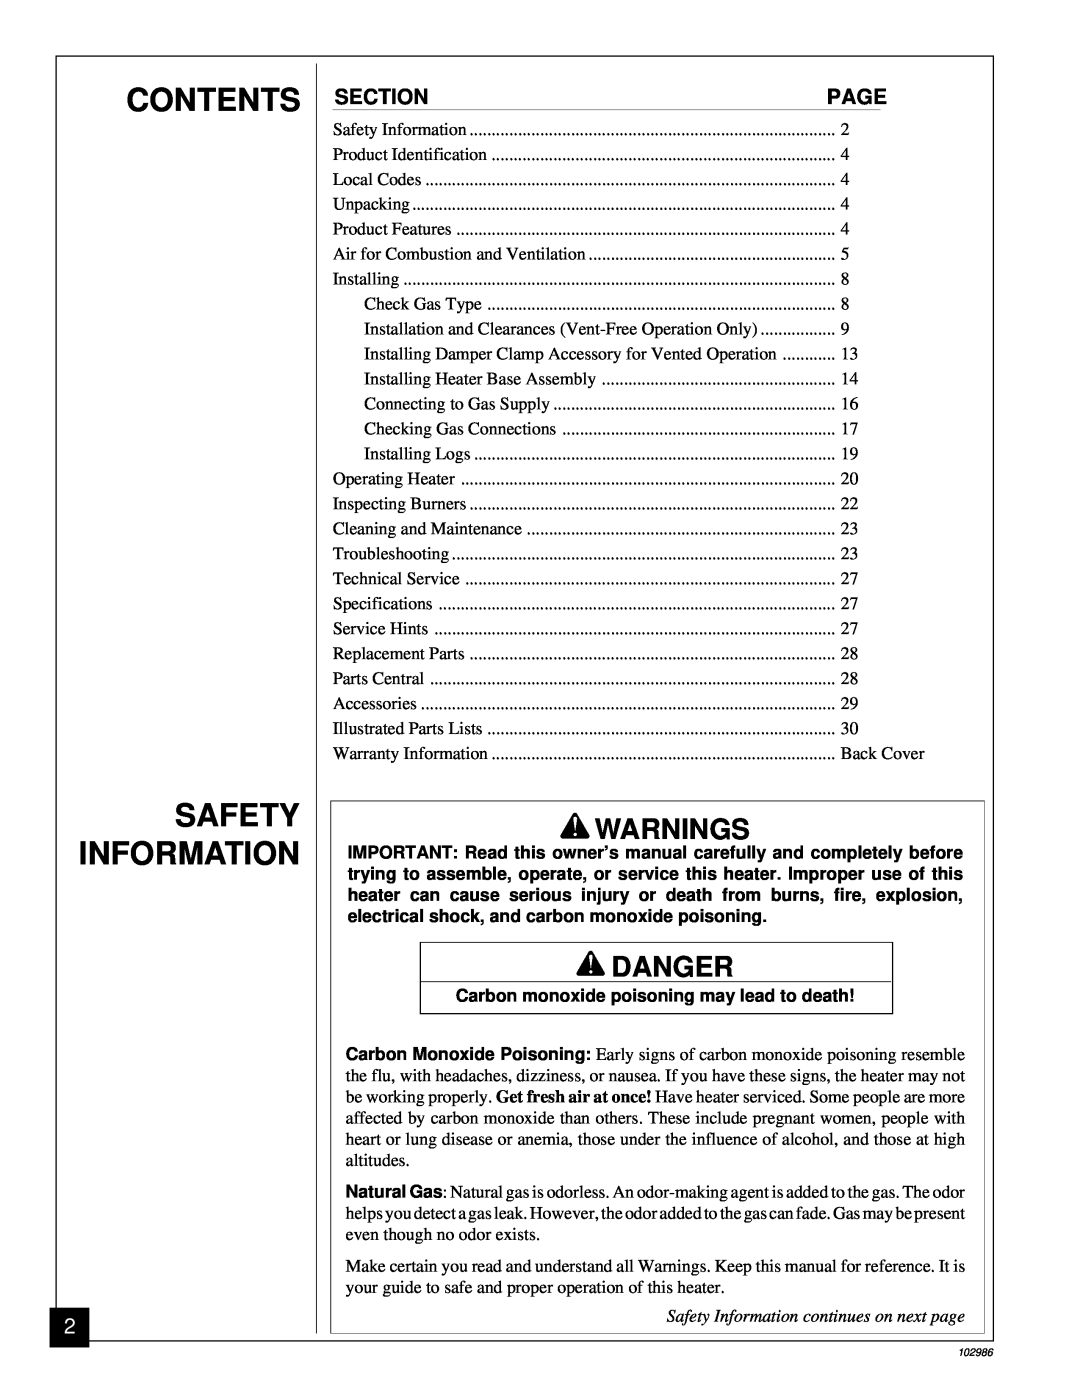 Desa Tech CGD3930N, CGD3018N Contents Safety Information, Warnings, Danger, Carbon monoxide poisoning may lead to death 